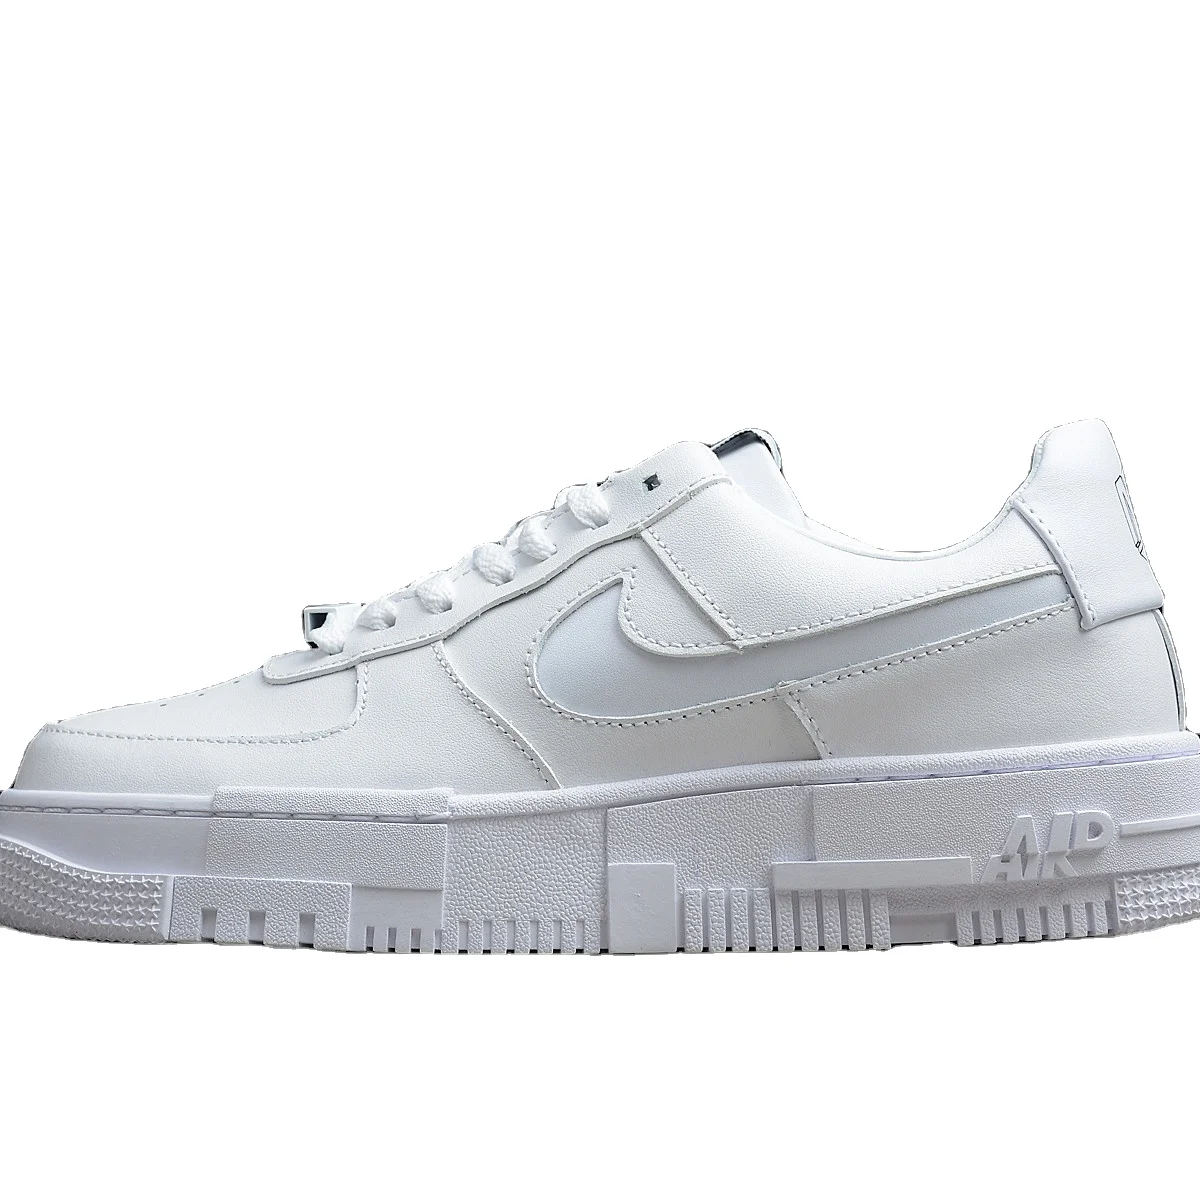 

NIKE Original AF 1 pixel White sport Sneakers Air Brand Force One Low Mid High Top Shoes Shadow casual Men's Women's, 5 colors